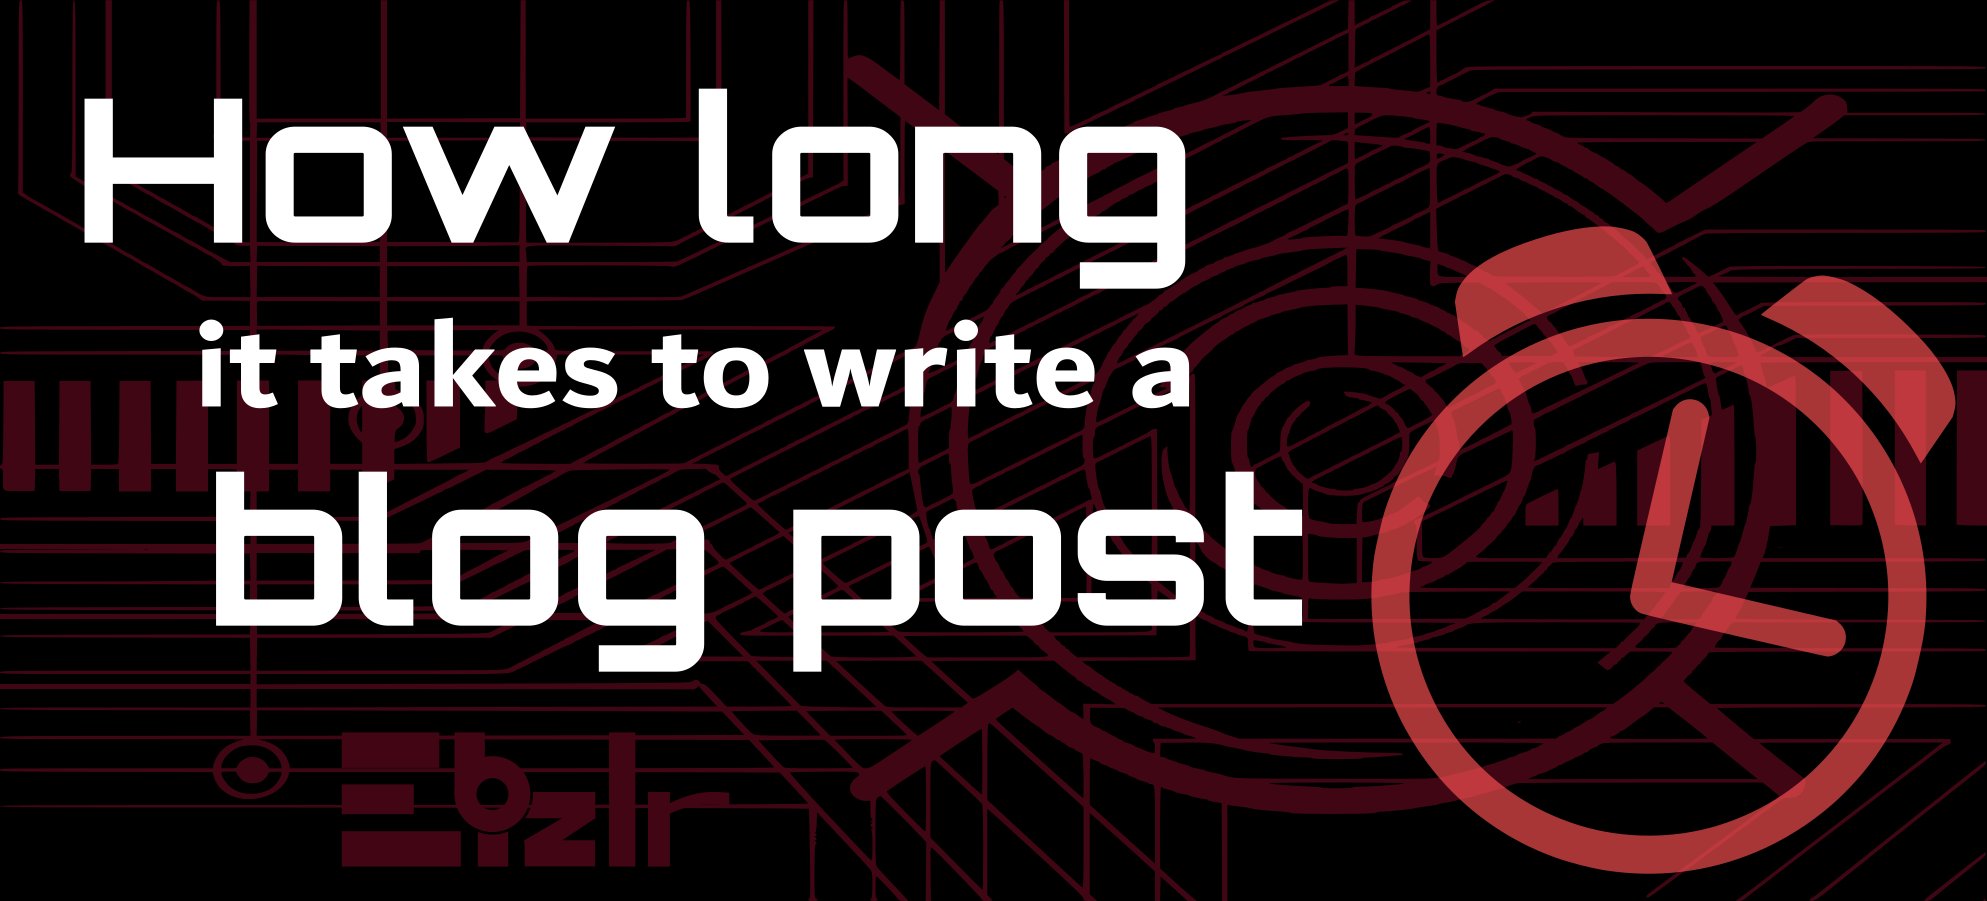 How long does it take to write a blog post